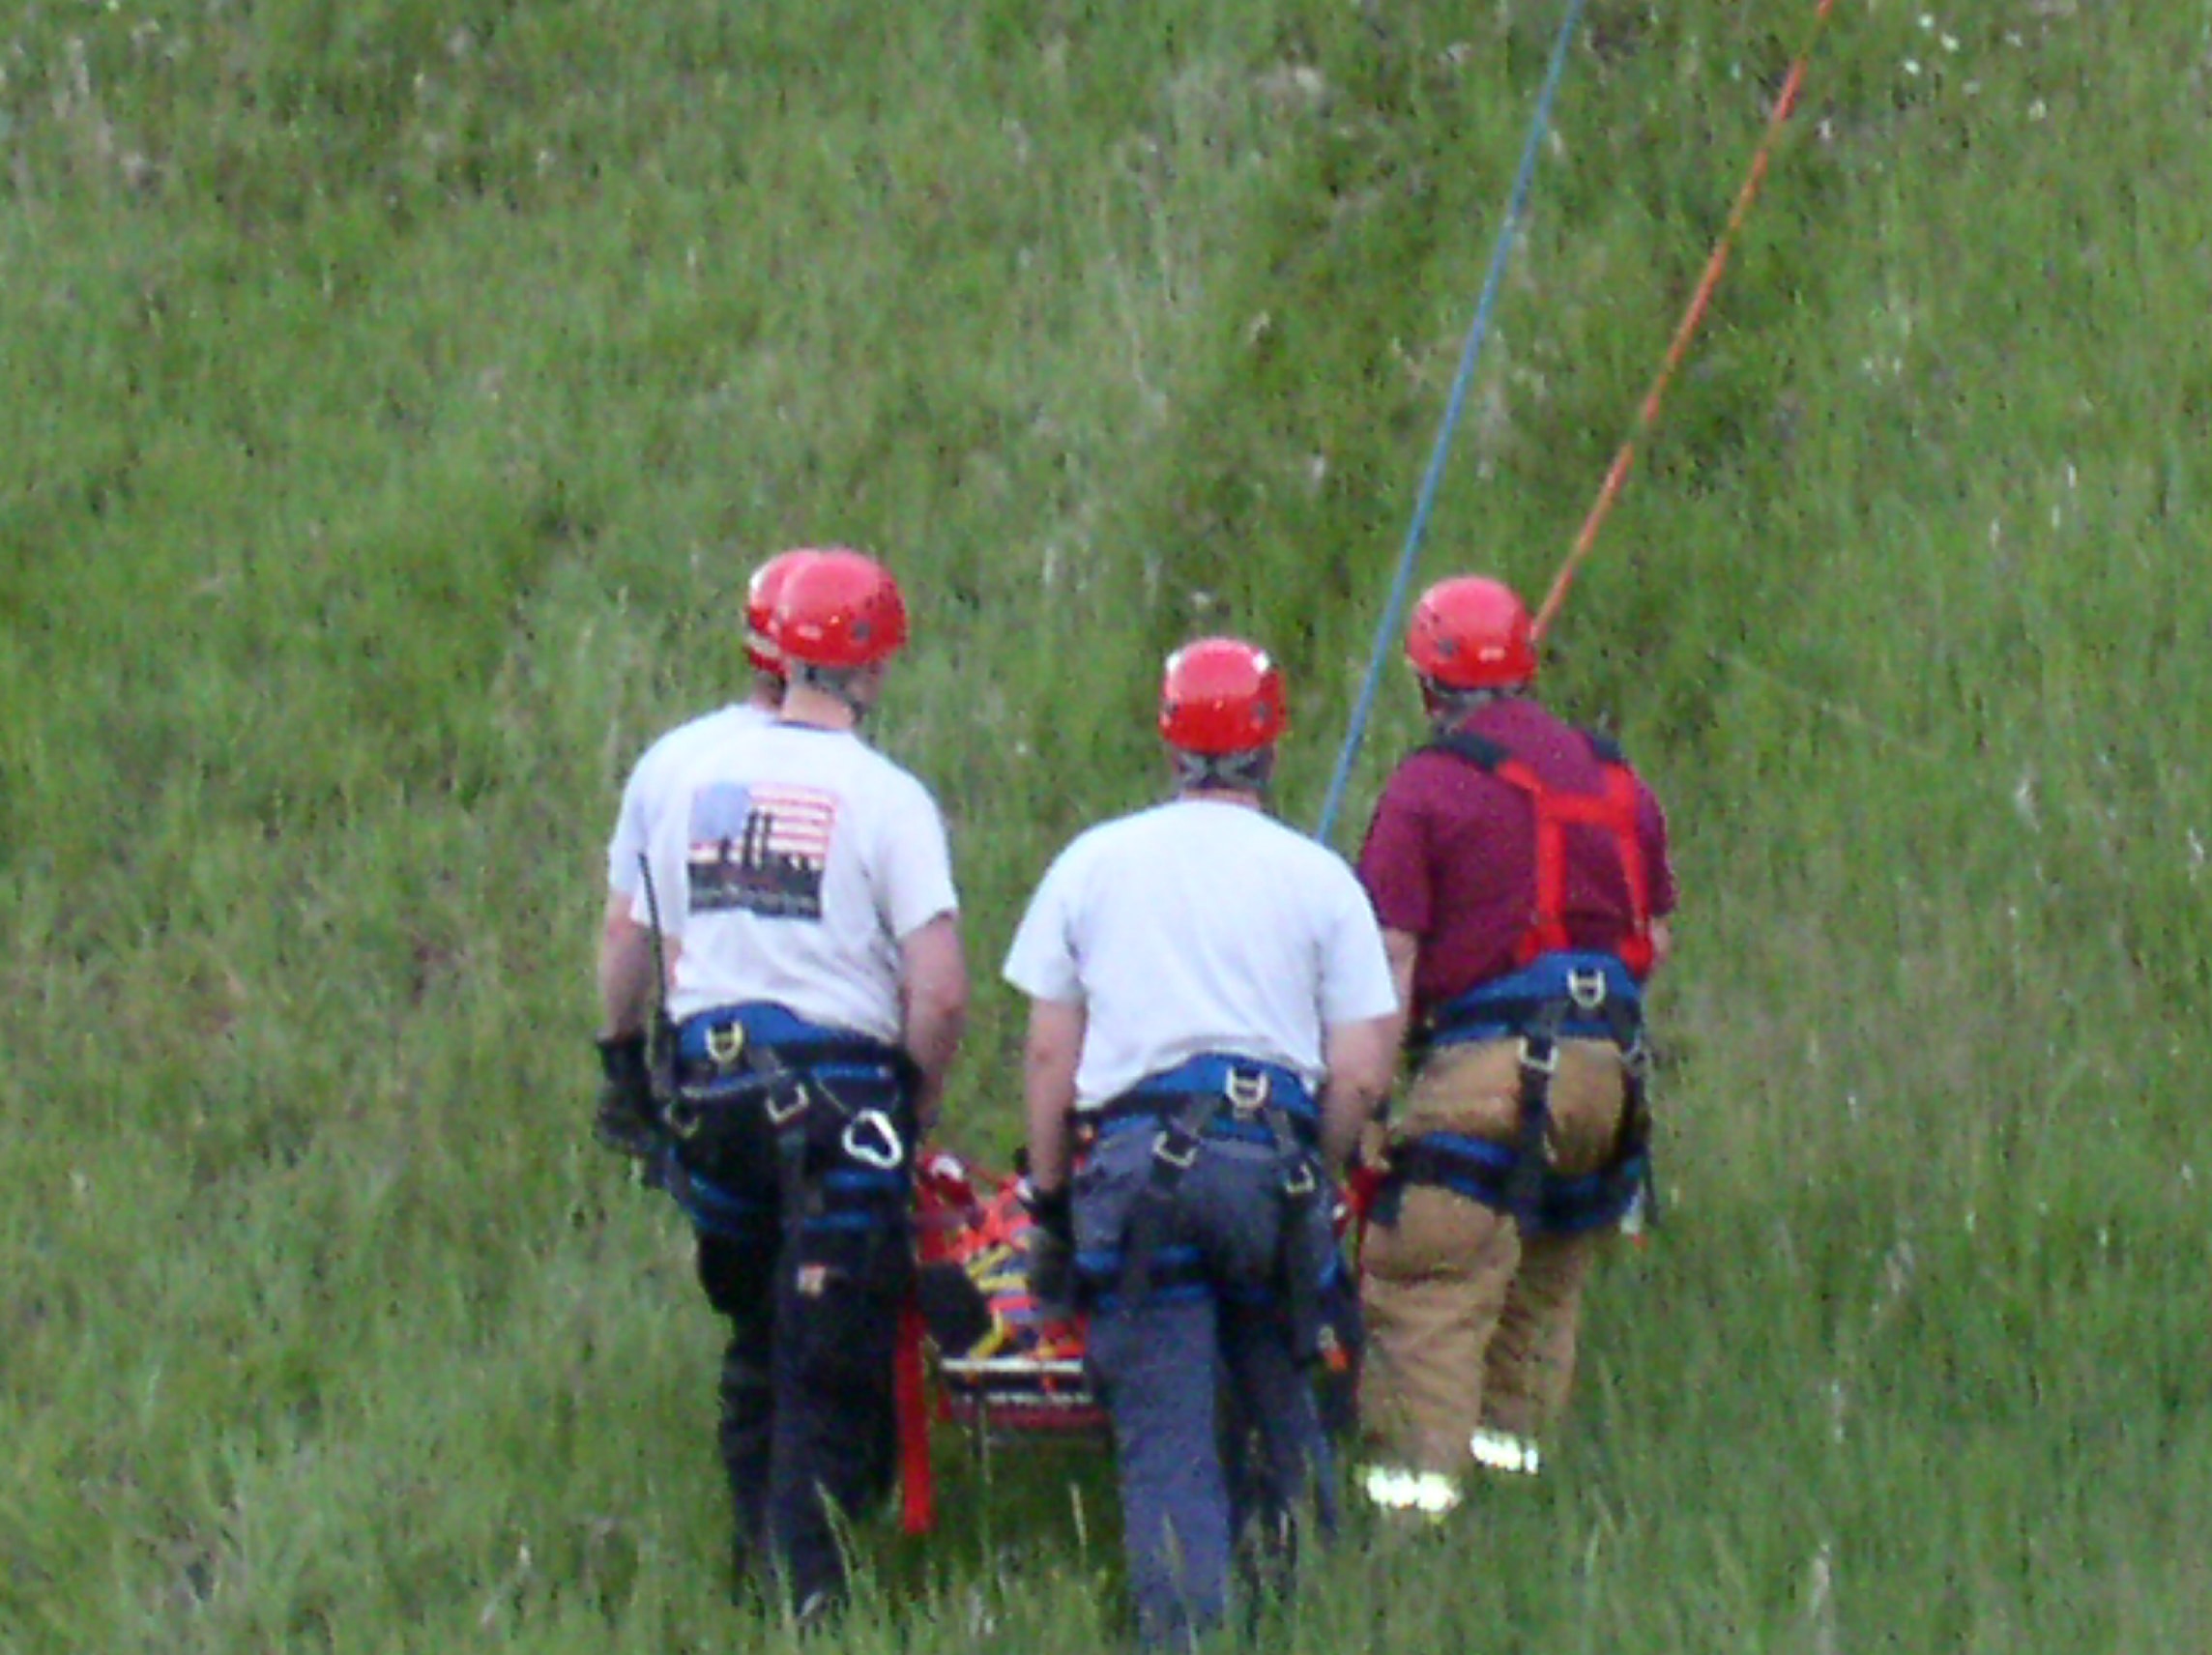 05-31-05  Training - Rope Rescue With Union Center